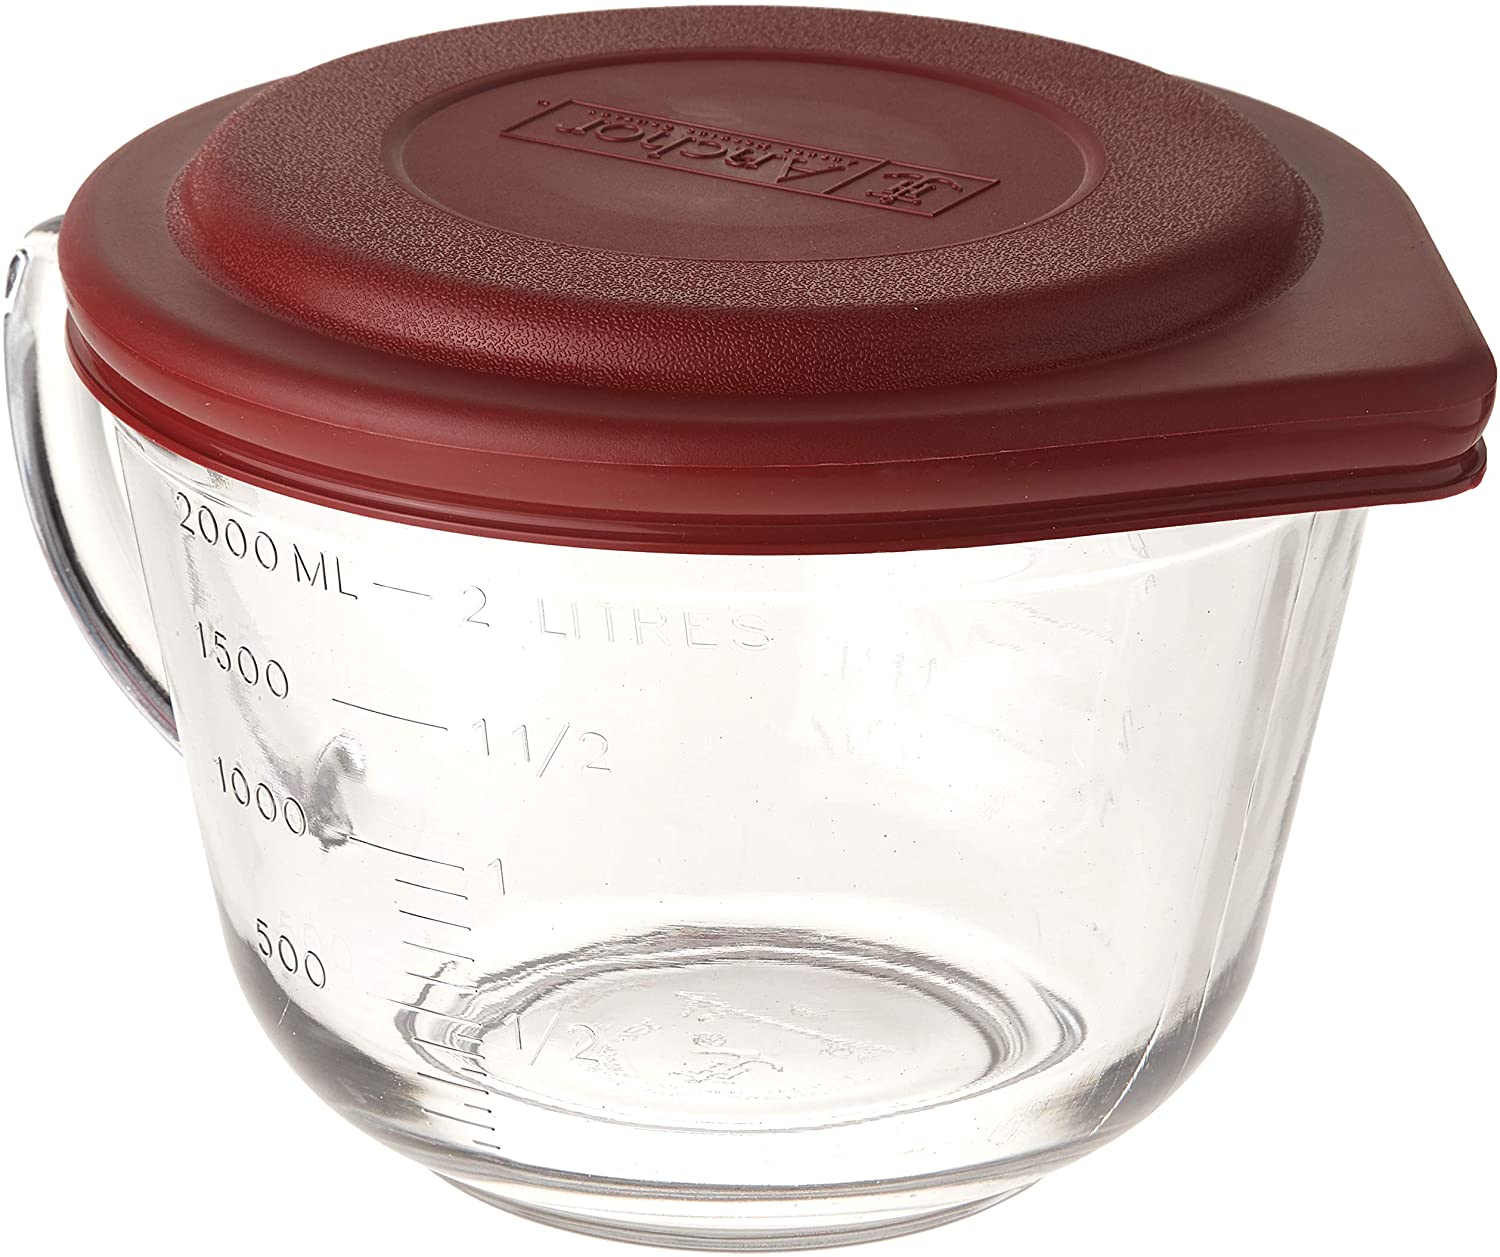 Anchor Hocking 91557Ahg17 2 qt. (8 Cups) Glass Measuring Cup / Batter Bowl with Red Lid, Clear